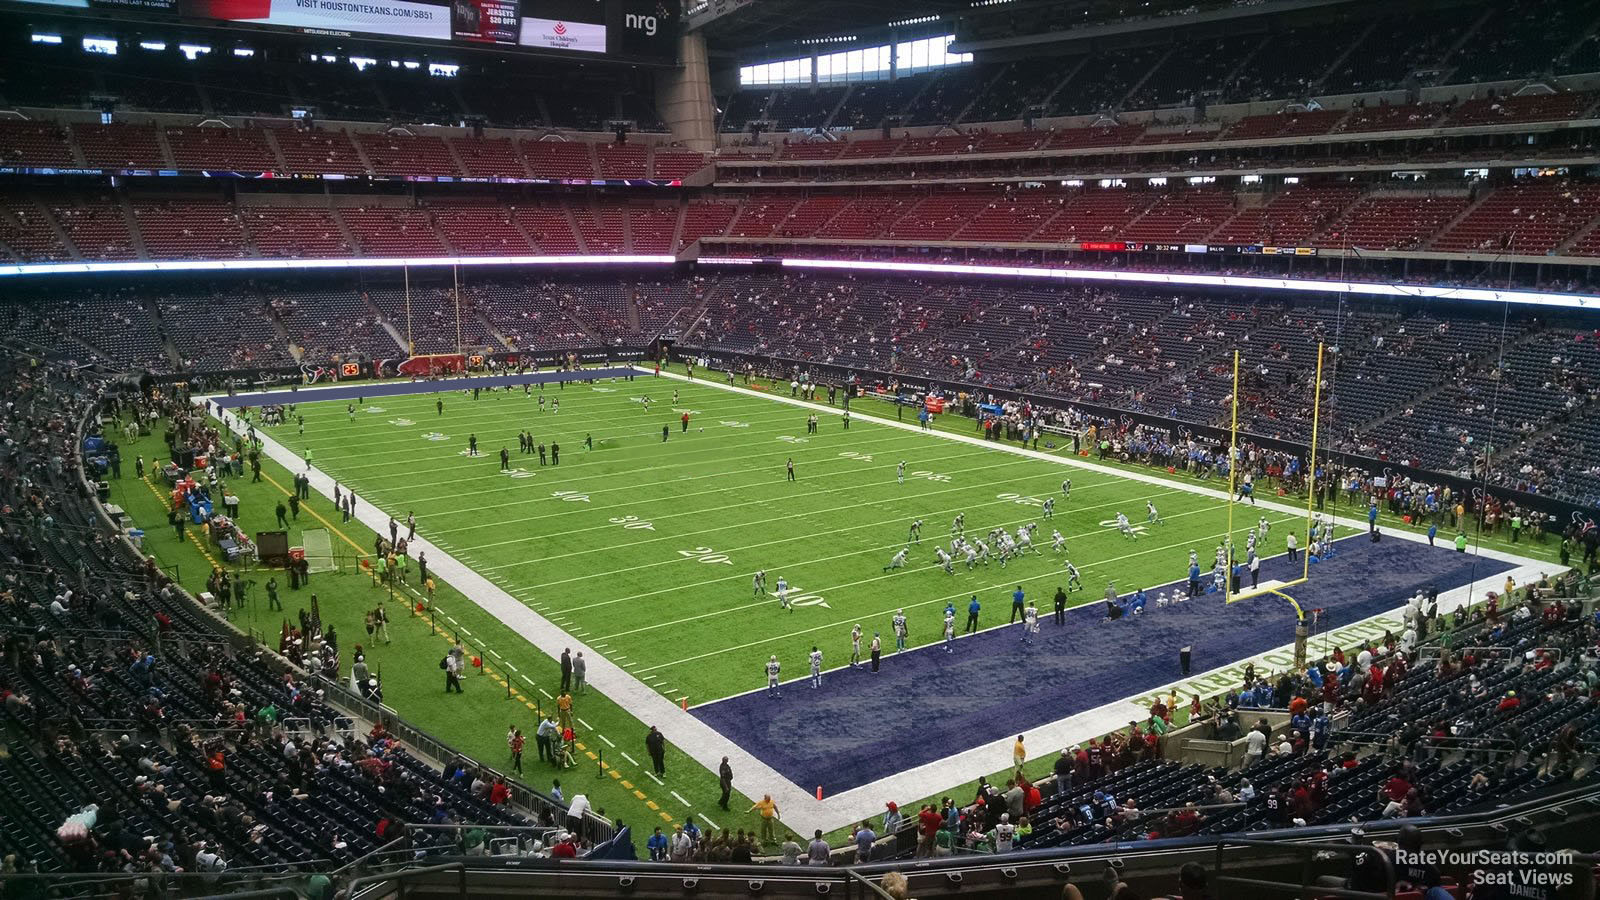 section 301, row l seat view  for football - nrg stadium